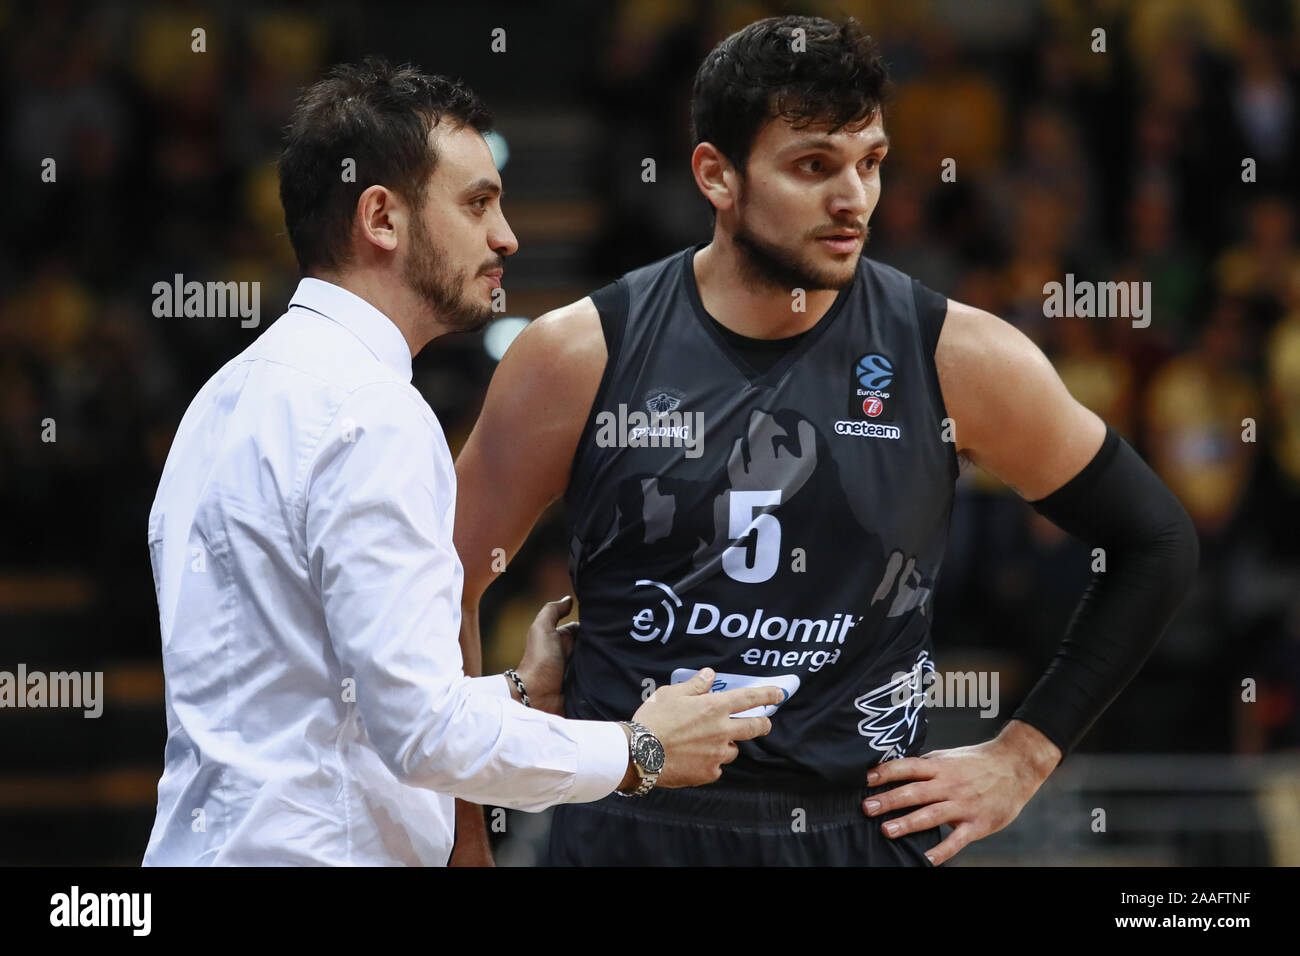 Oldenburg, Germany, November 20, 2019: Nicola Brienza and Alessandro Gentile during a Eurocup match at the Kleine EWE Arena. Stock Photo